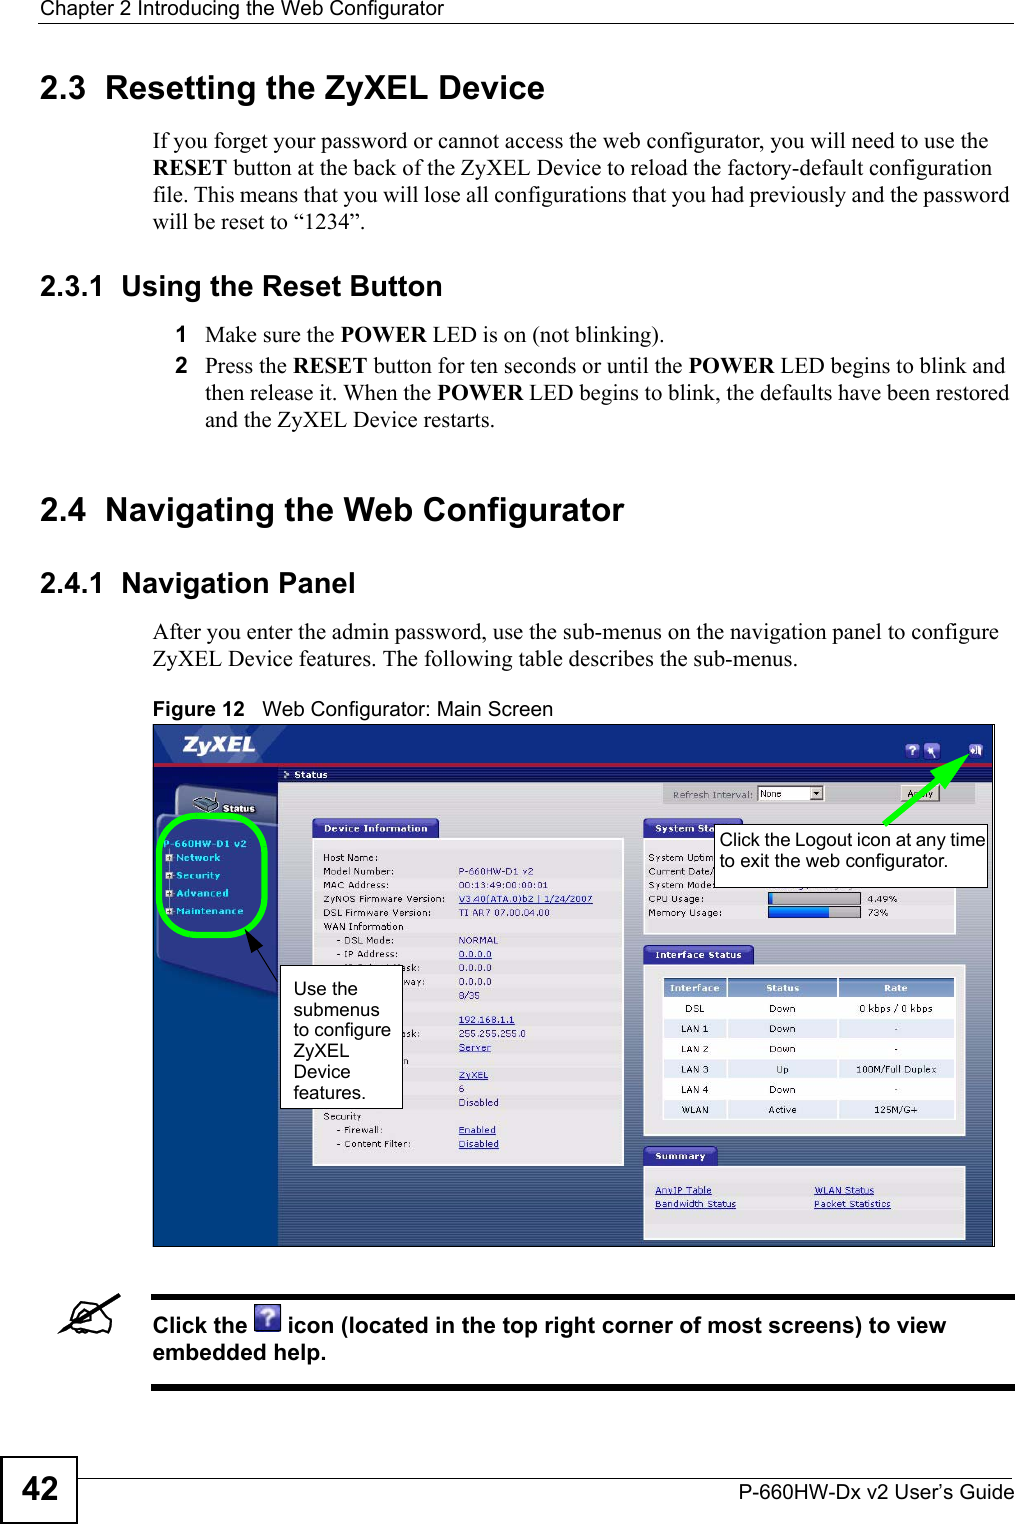 Chapter 2 Introducing the Web ConfiguratorP-660HW-Dx v2 User’s Guide422.3  Resetting the ZyXEL DeviceIf you forget your password or cannot access the web configurator, you will need to use the RESET button at the back of the ZyXEL Device to reload the factory-default configuration file. This means that you will lose all configurations that you had previously and the password will be reset to “1234”.2.3.1  Using the Reset Button1Make sure the POWER LED is on (not blinking).2Press the RESET button for ten seconds or until the POWER LED begins to blink and then release it. When the POWER LED begins to blink, the defaults have been restored and the ZyXEL Device restarts.2.4  Navigating the Web Configurator2.4.1  Navigation PanelAfter you enter the admin password, use the sub-menus on the navigation panel to configure ZyXEL Device features. The following table describes the sub-menus.Figure 12   Web Configurator: Main Screen &quot;Click the   icon (located in the top right corner of most screens) to view embedded help. Use the submenus to configure ZyXEL Device features.Click the Logout icon at any time to exit the web configurator.